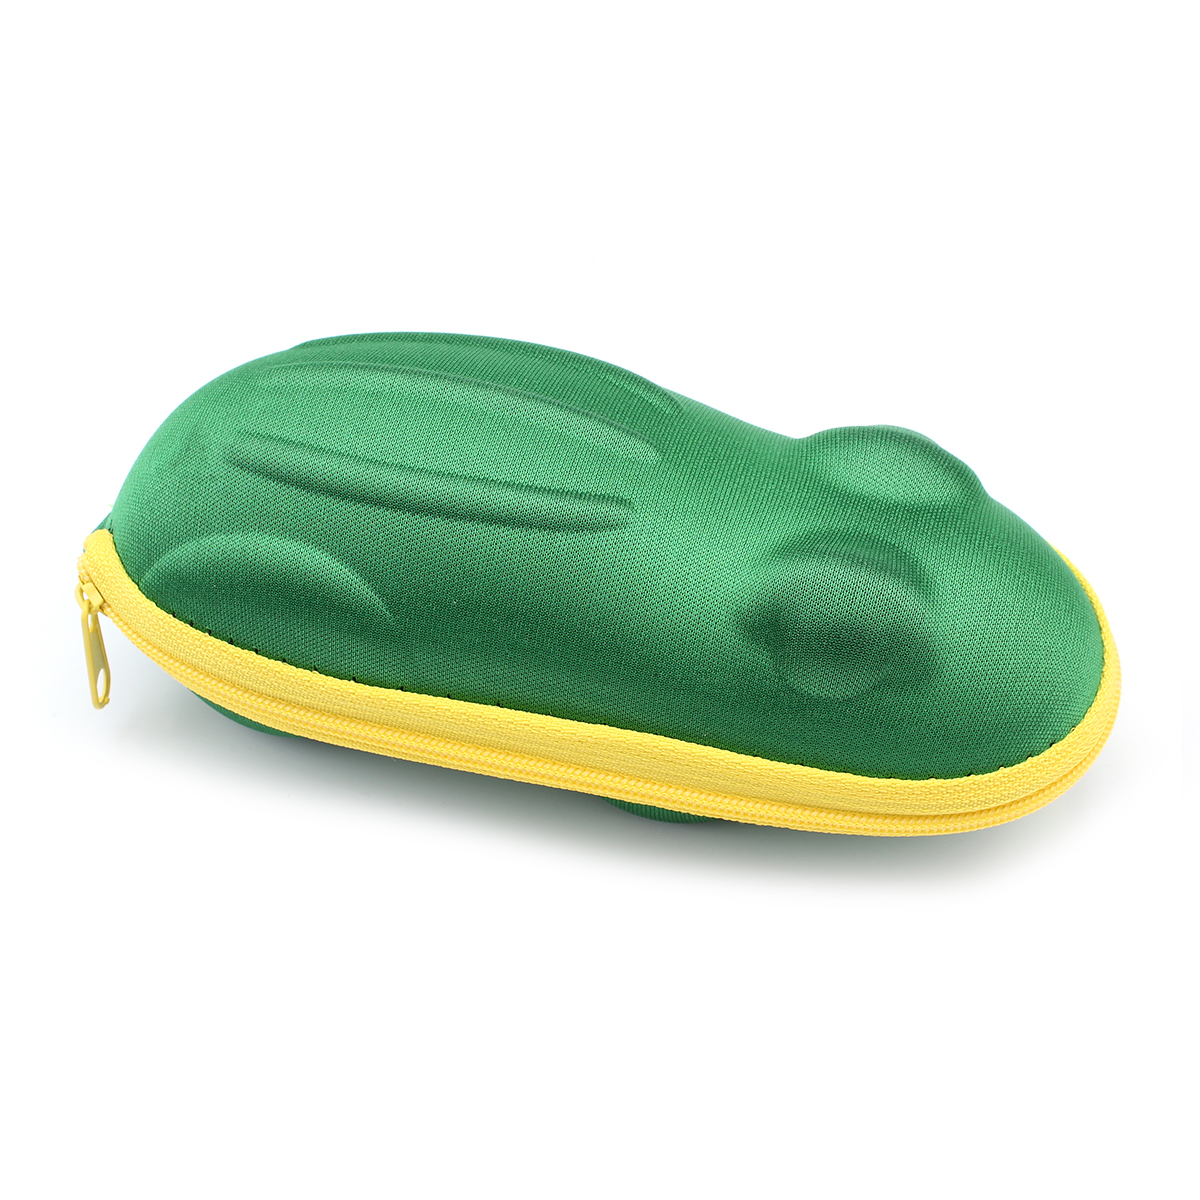 2 Frog Boxes Green2 individual a car glasses case Cartoon automobile Model children Sun glasses Box lovely zipper bag Toy box